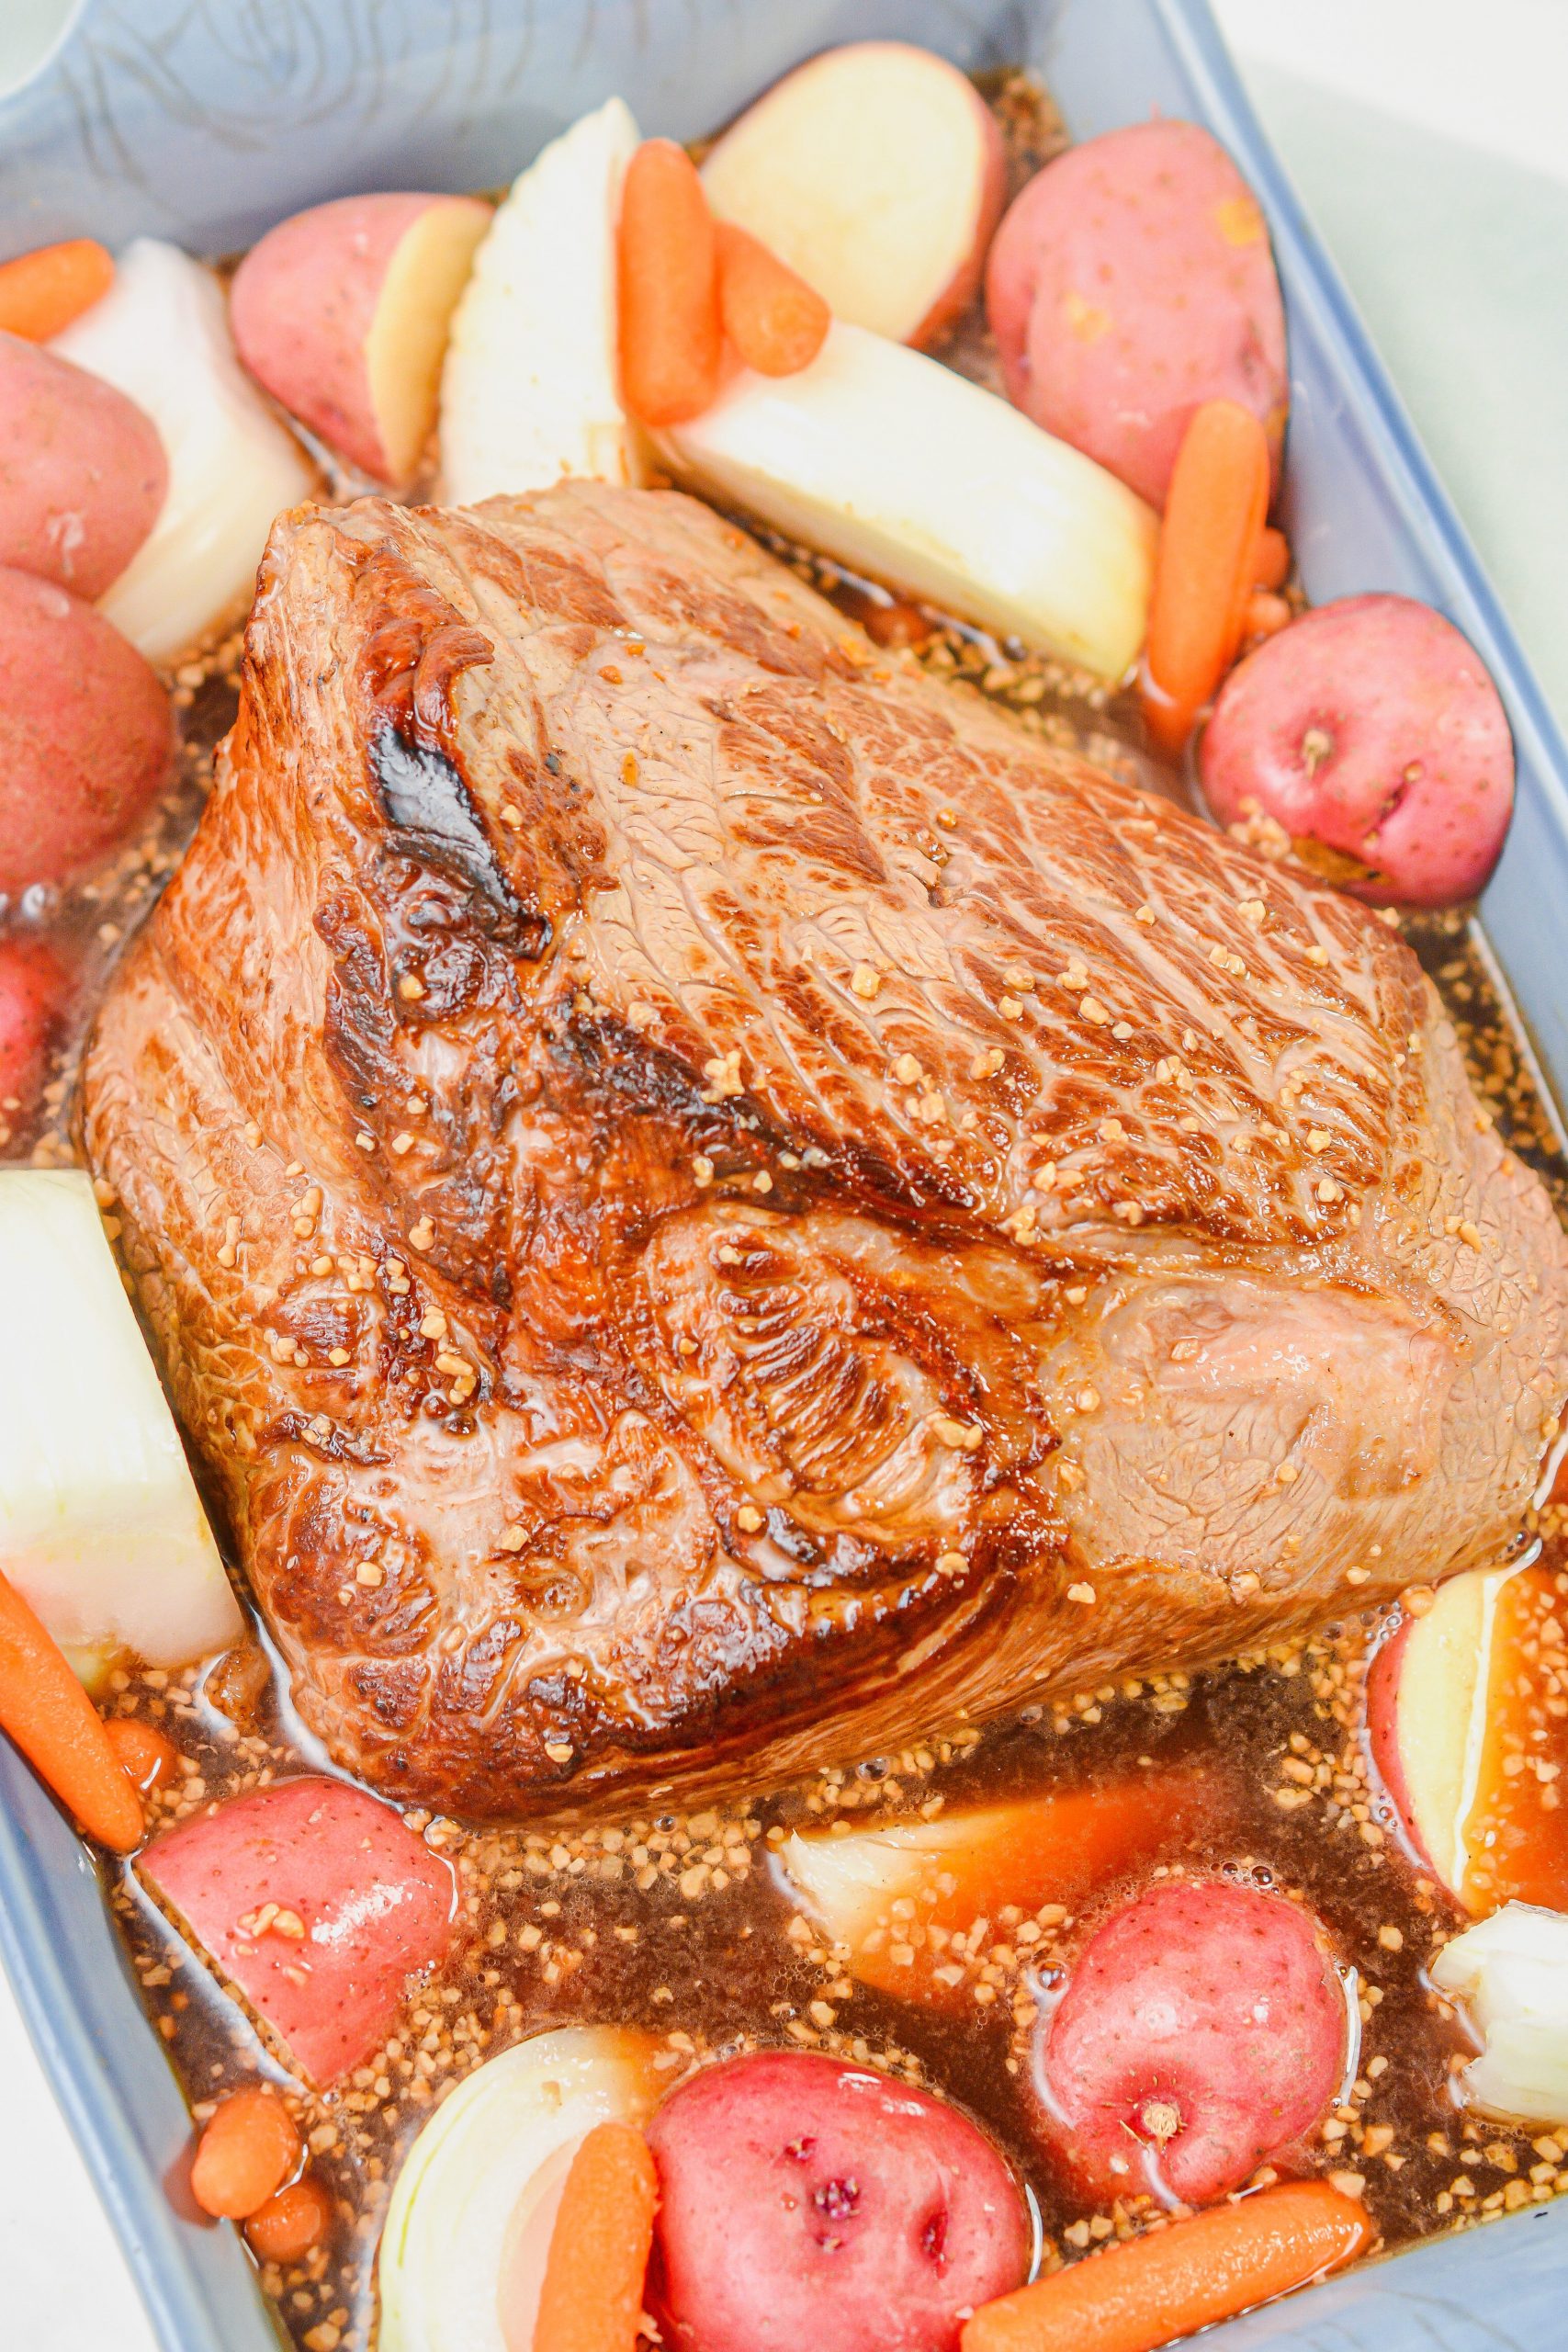 Pour the sauce mixture over the roast and vegetables in the dish, and bake for 3 hours.